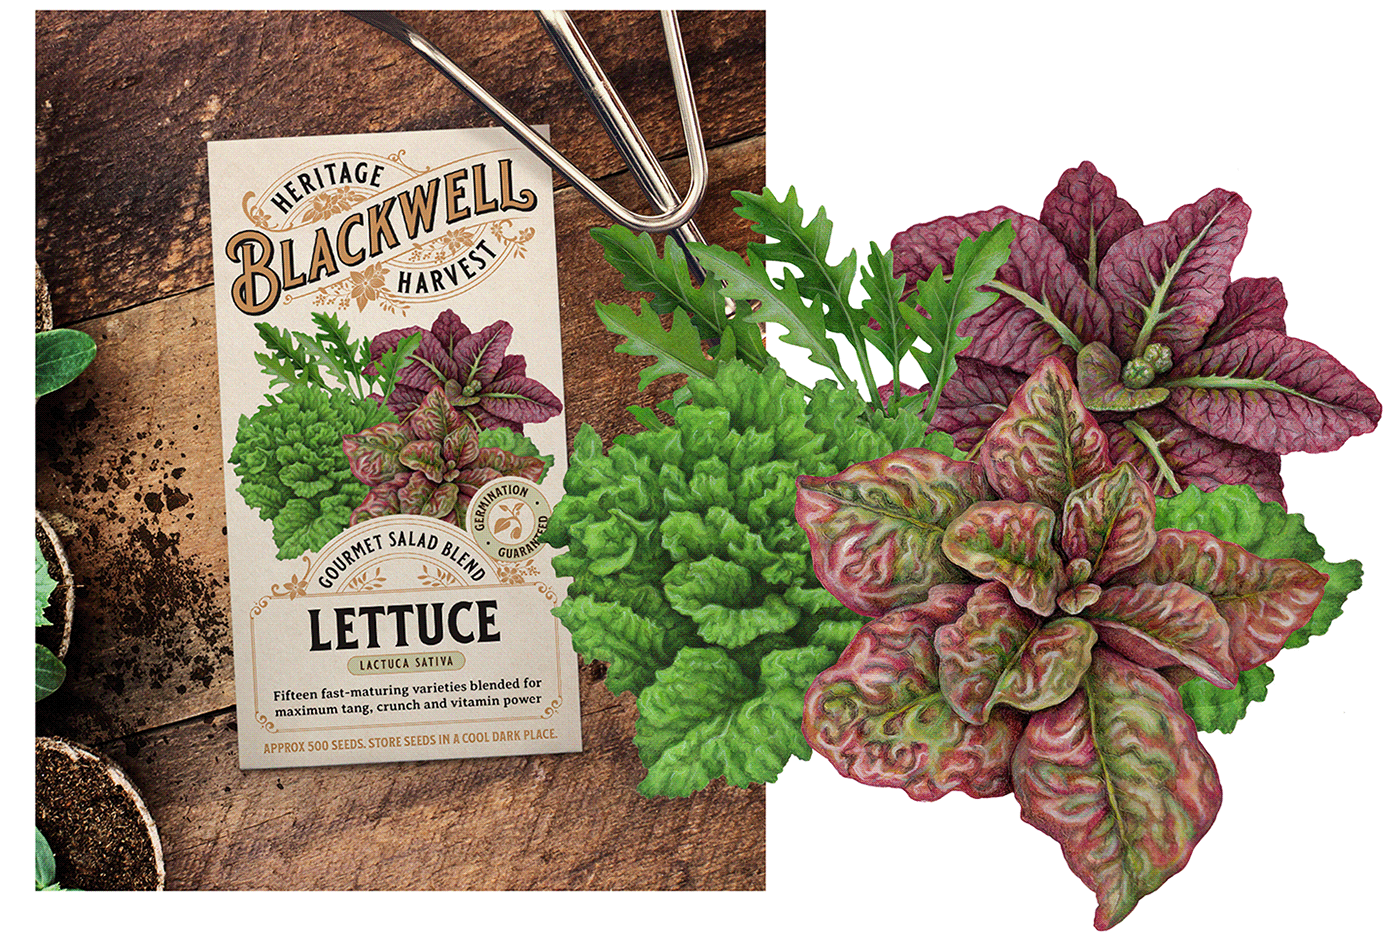 Illustration of a blend of lettuce varieties used on seed packet packaging.